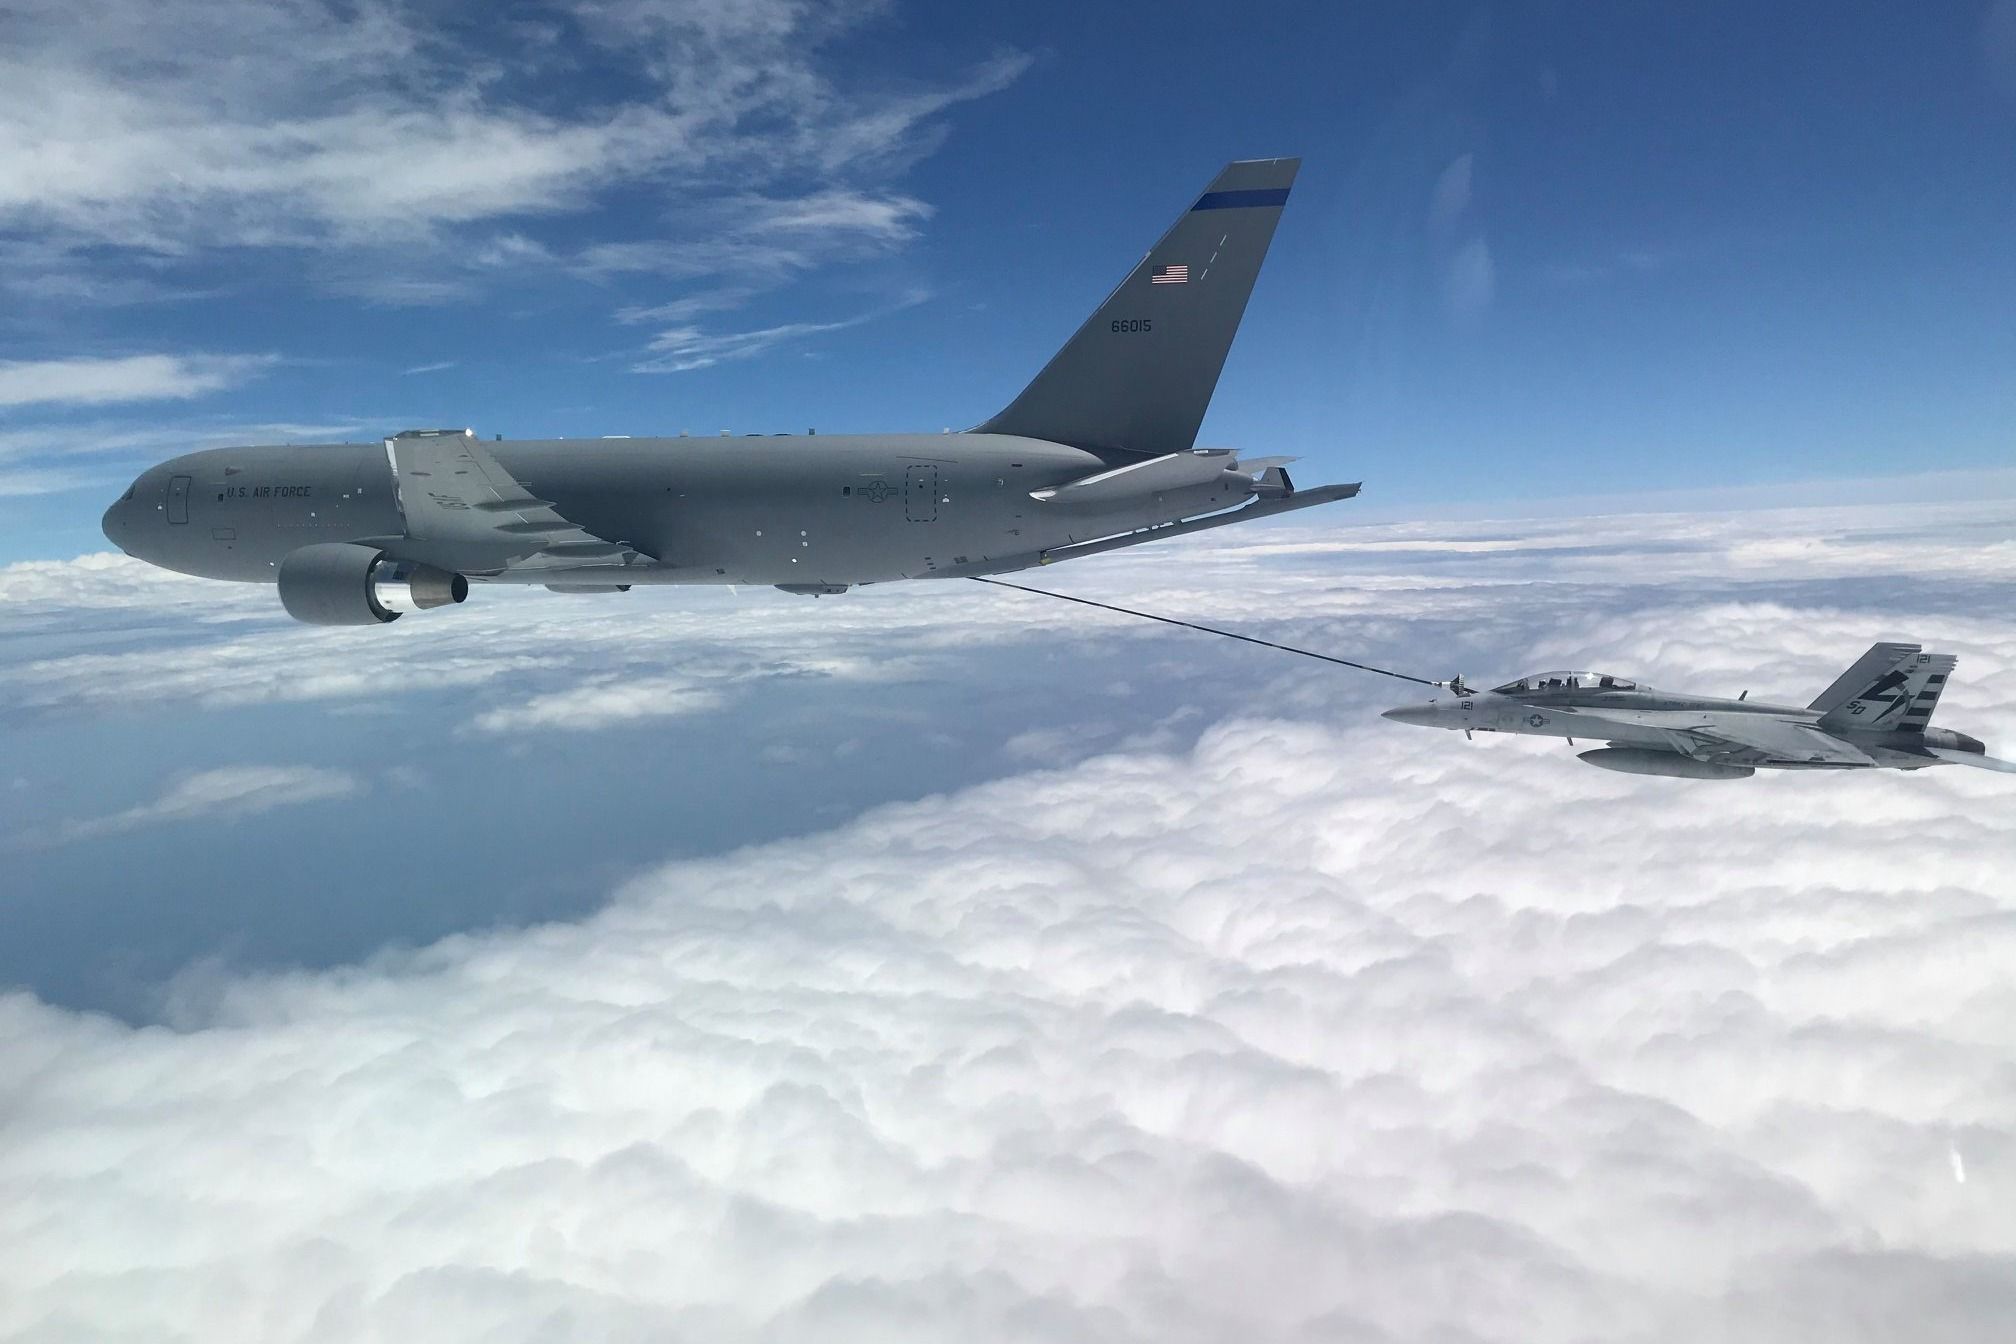 A Boeing KC-46 refueling a fighter jet above the clouds.